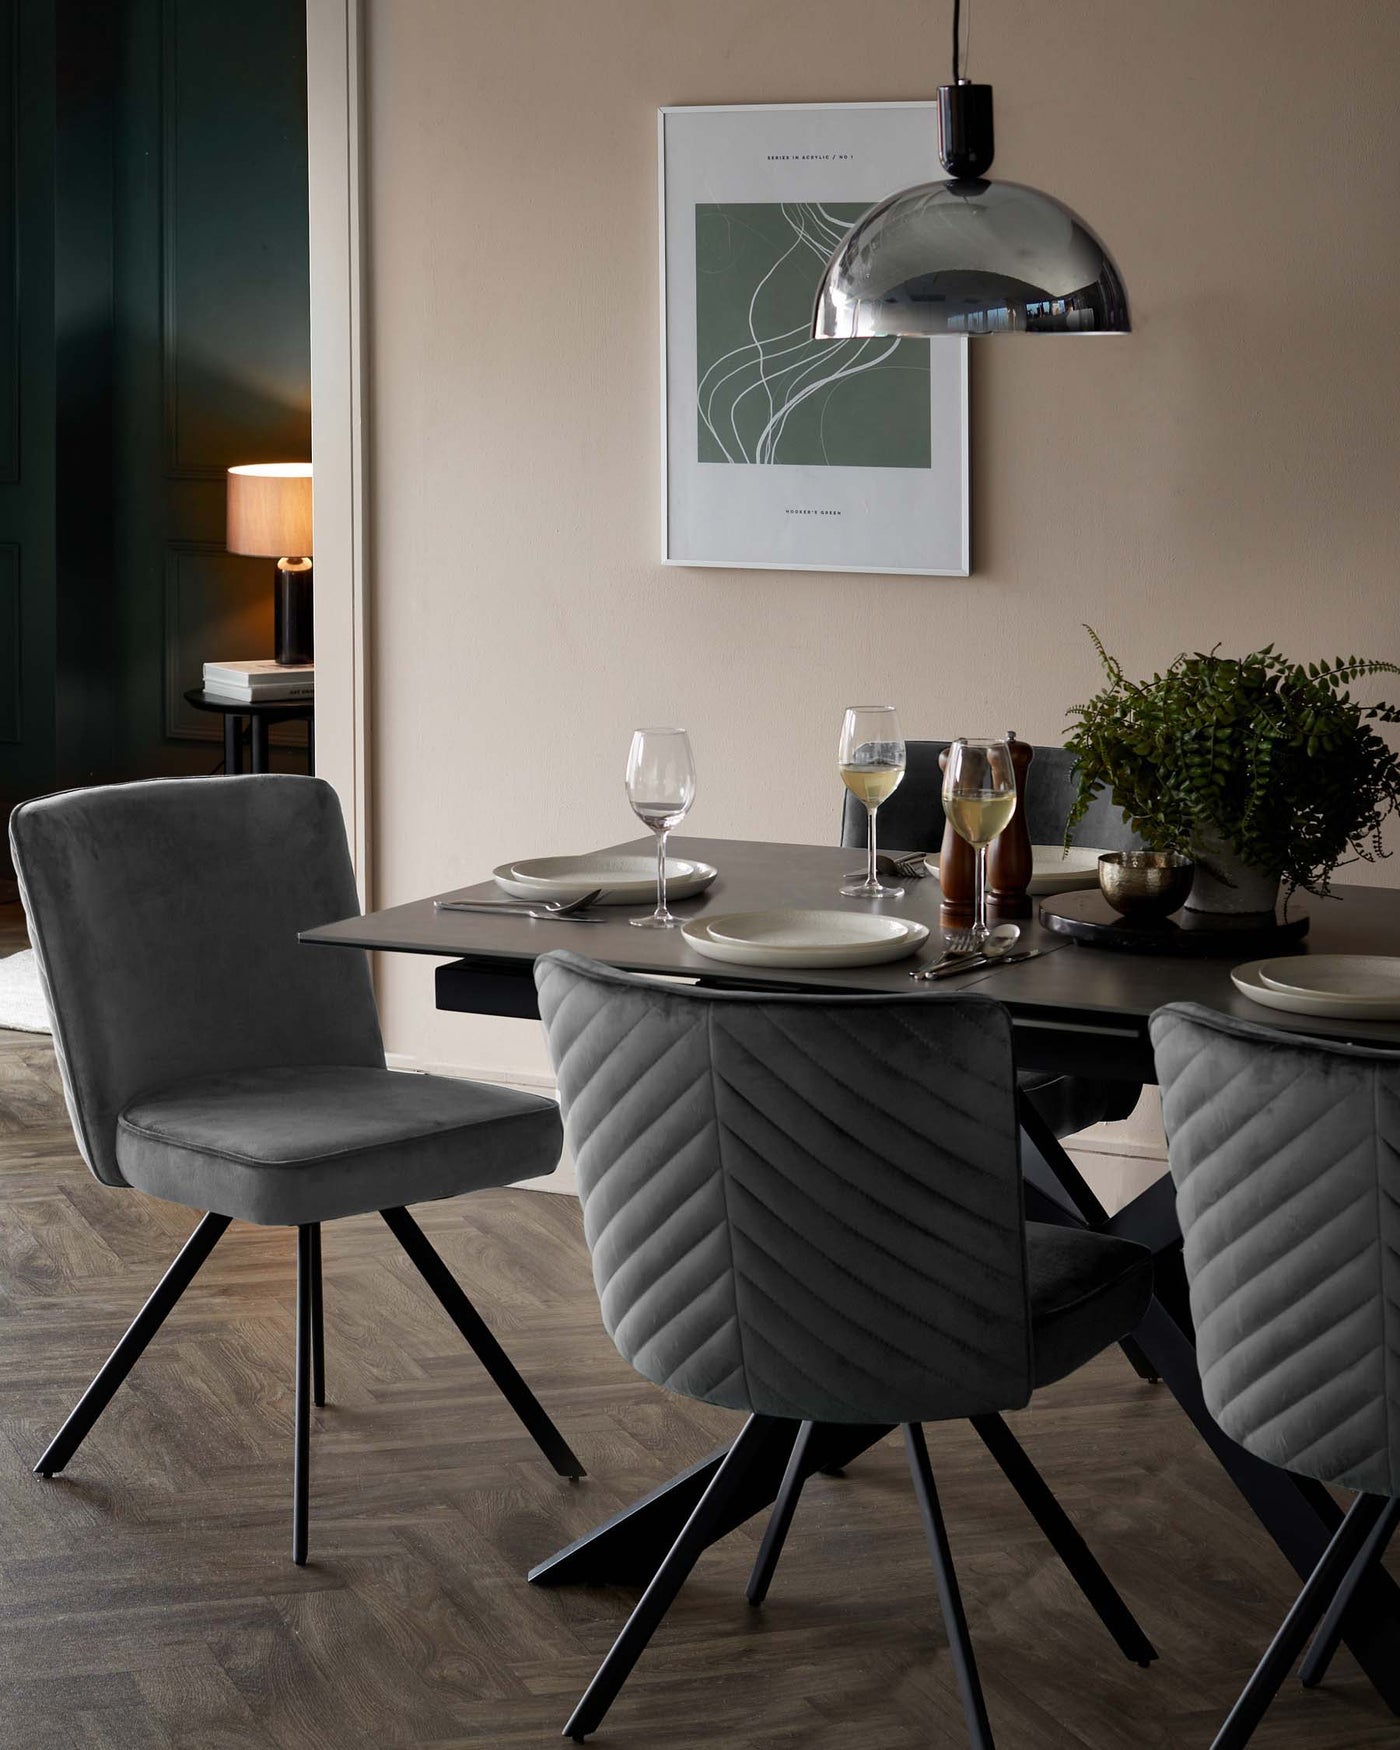 Contemporary dining furniture set featuring a sleek round table with a dark tabletop and angular black legs, accompanied by four plush, grey, velvet upholstered chairs with chevron-stitch detailing and splayed metal legs. A modern pendant light with a chrome finish hangs above the table, accentuating the sophisticated, minimalist decor of the dining space.